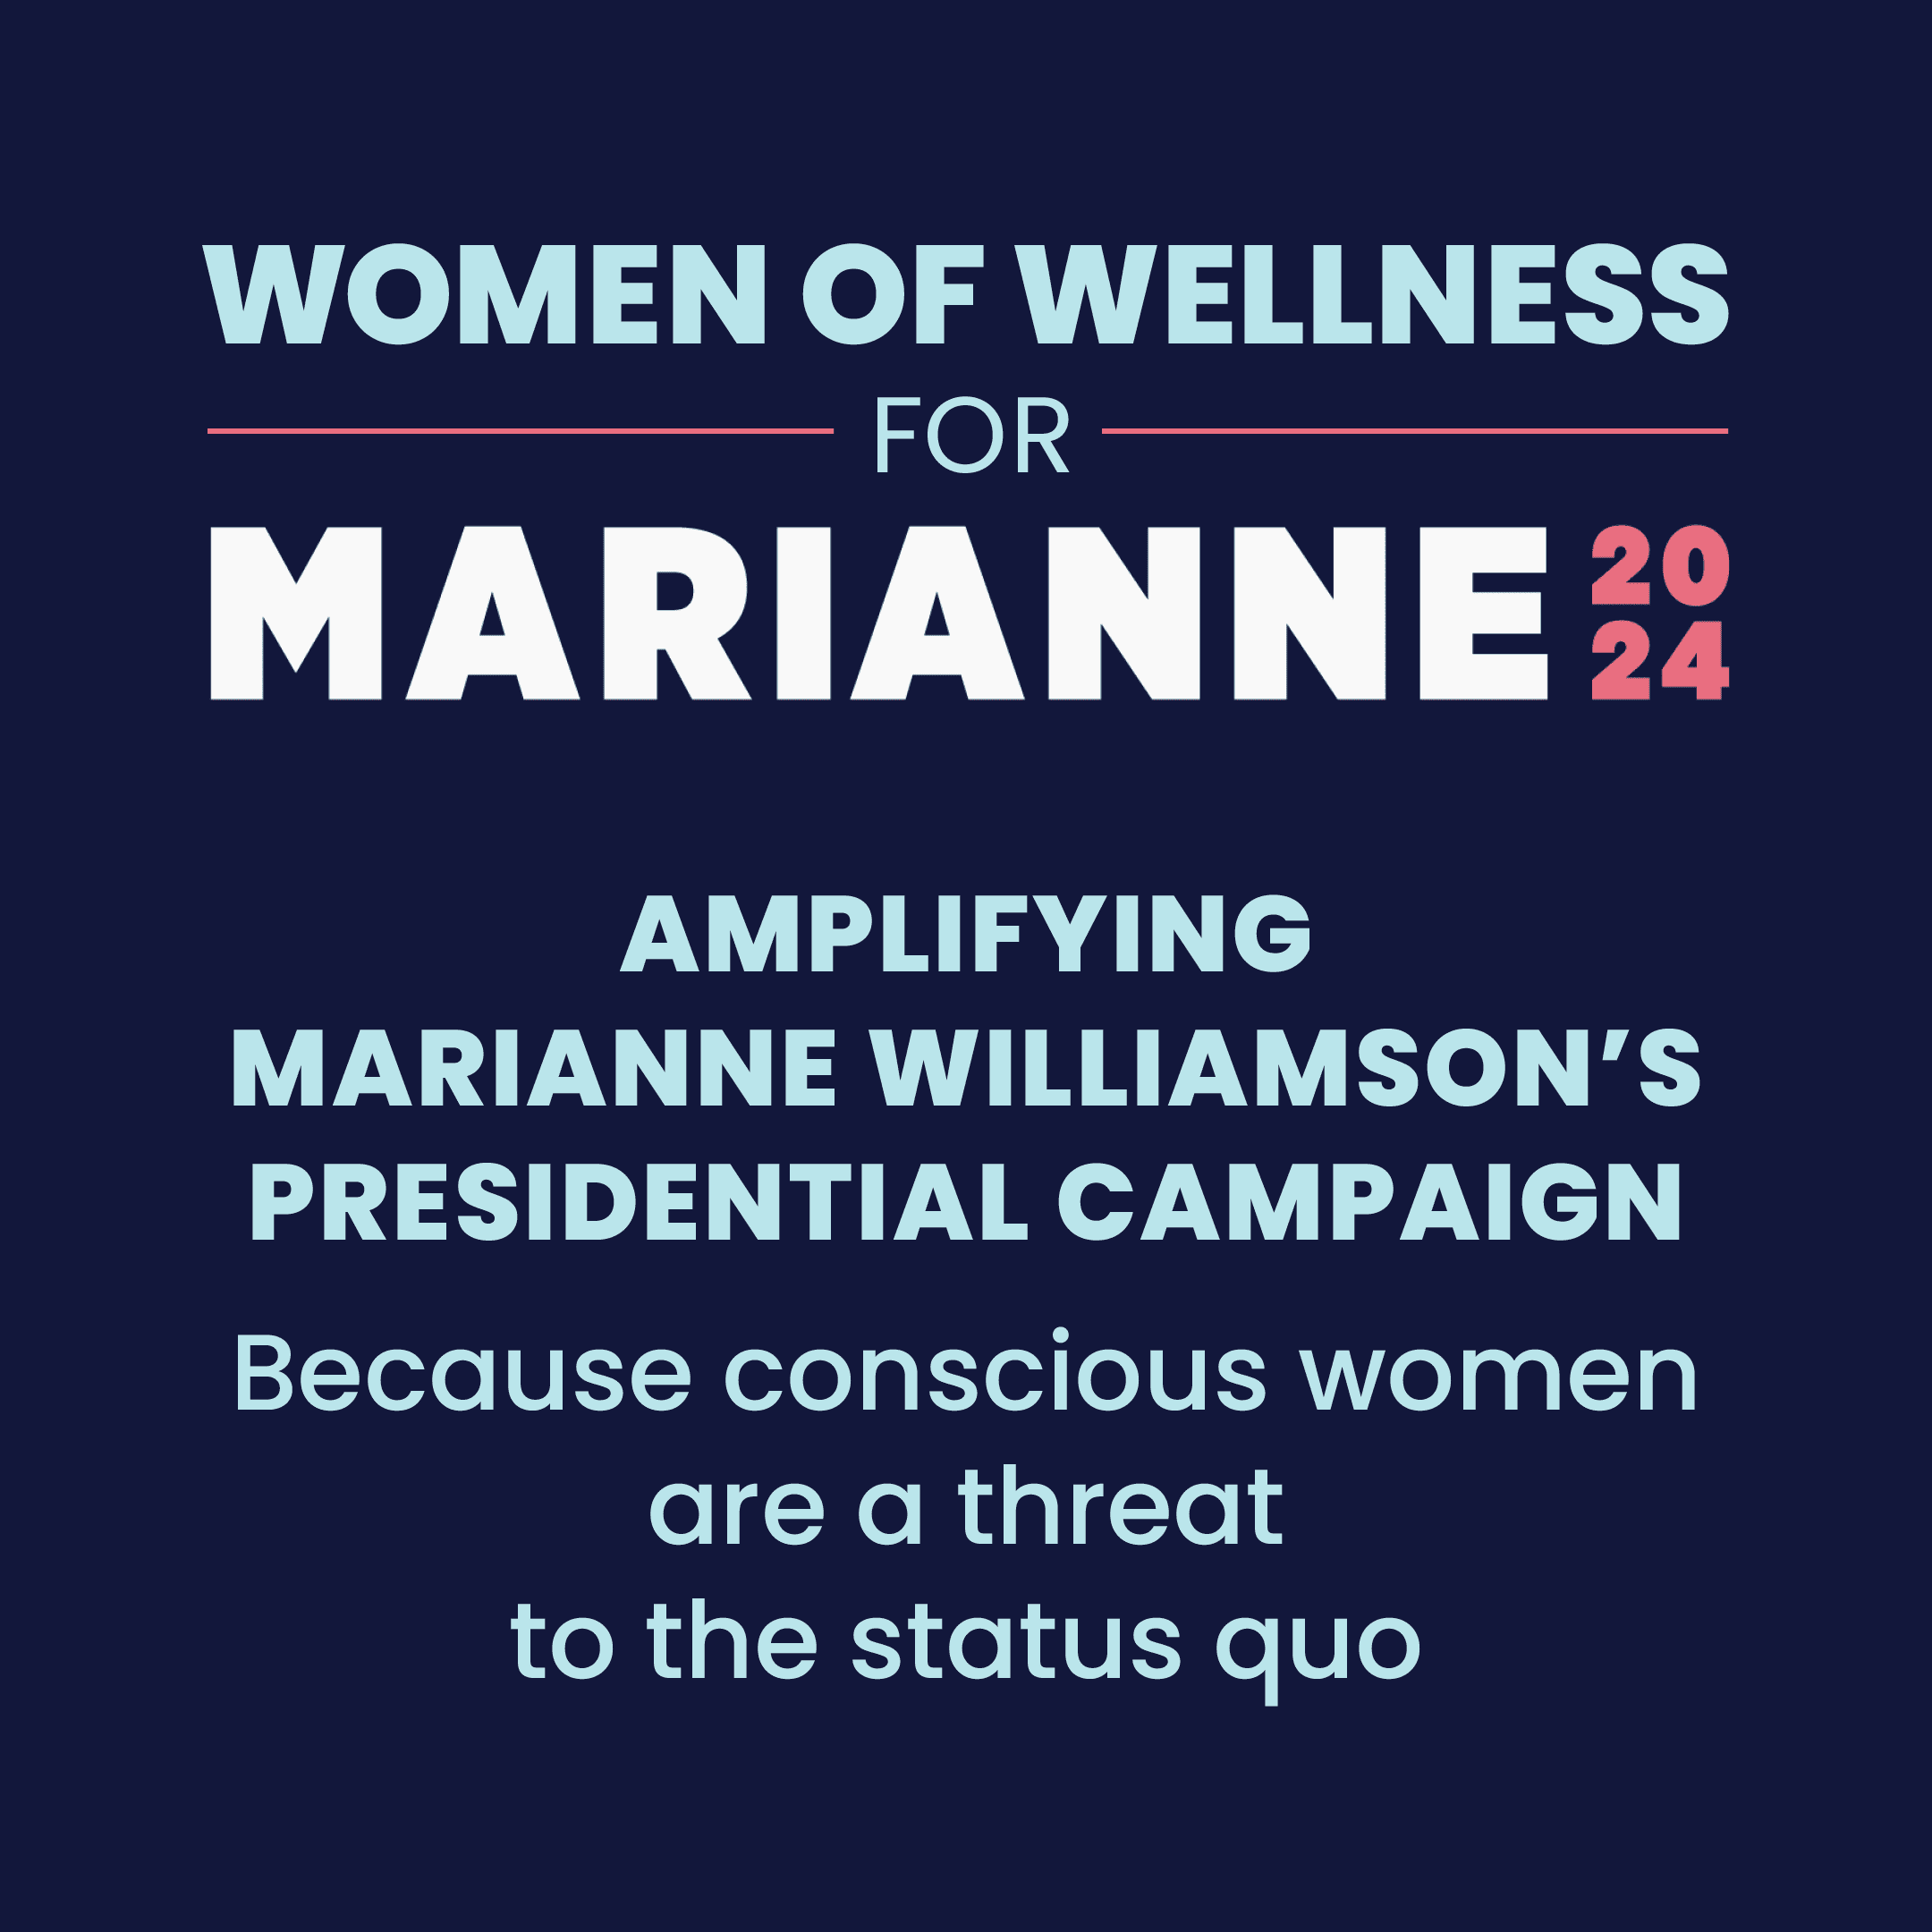 Women of wellness supporting Marianne Williamson in her 2024 presidential campaign.